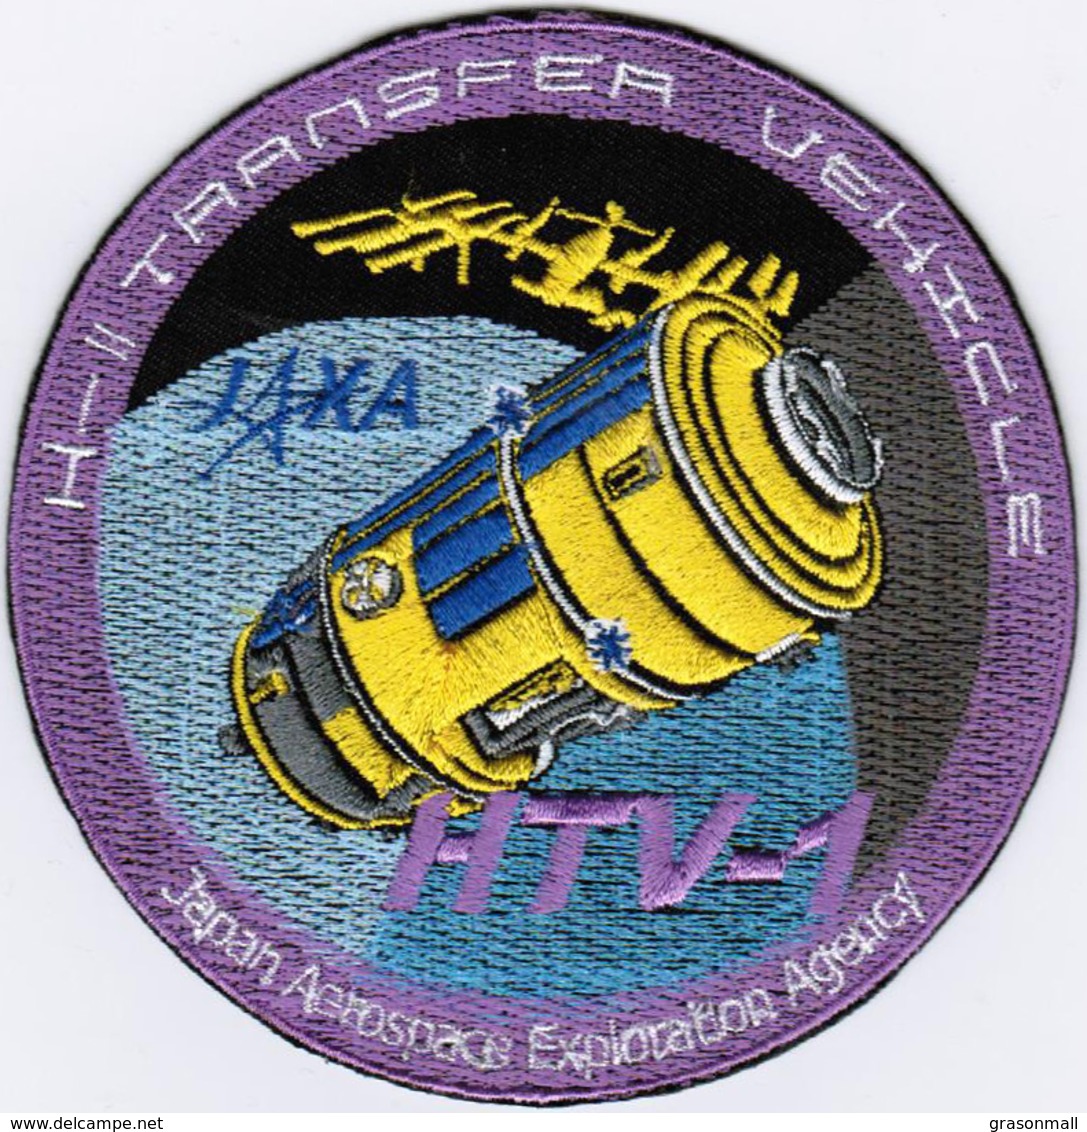 ISS Expedition 20 HTV-1 Japan JAXA International Space Station Badge Patch - Patches